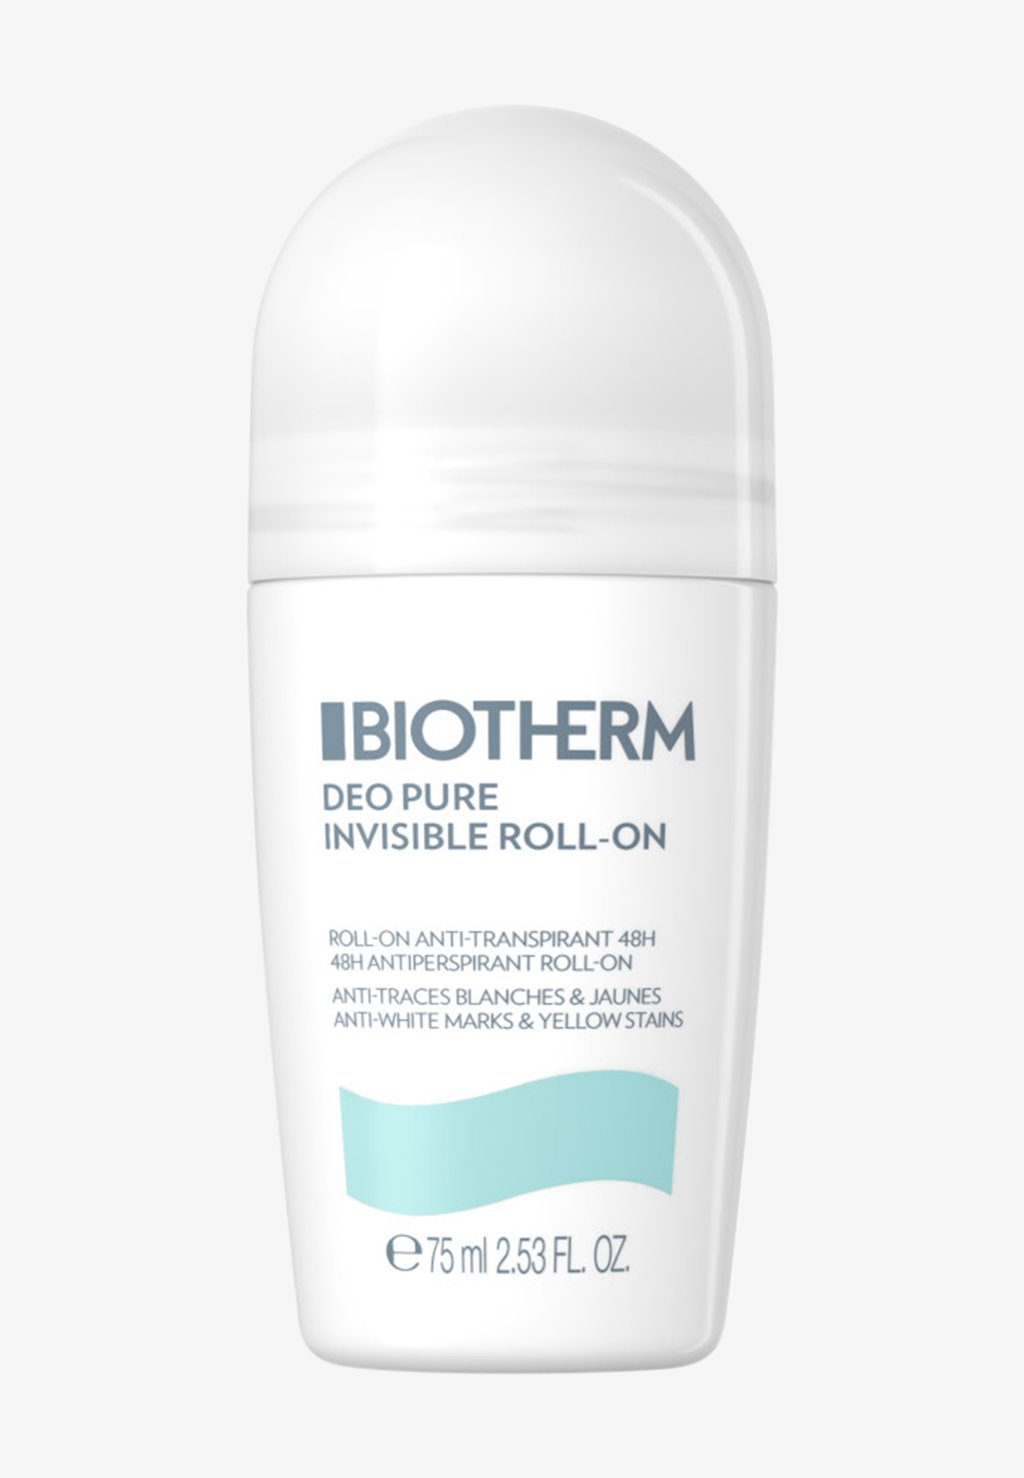 Дезодорант DEO PURE INVISIBLE ROLL-ON Biotherm